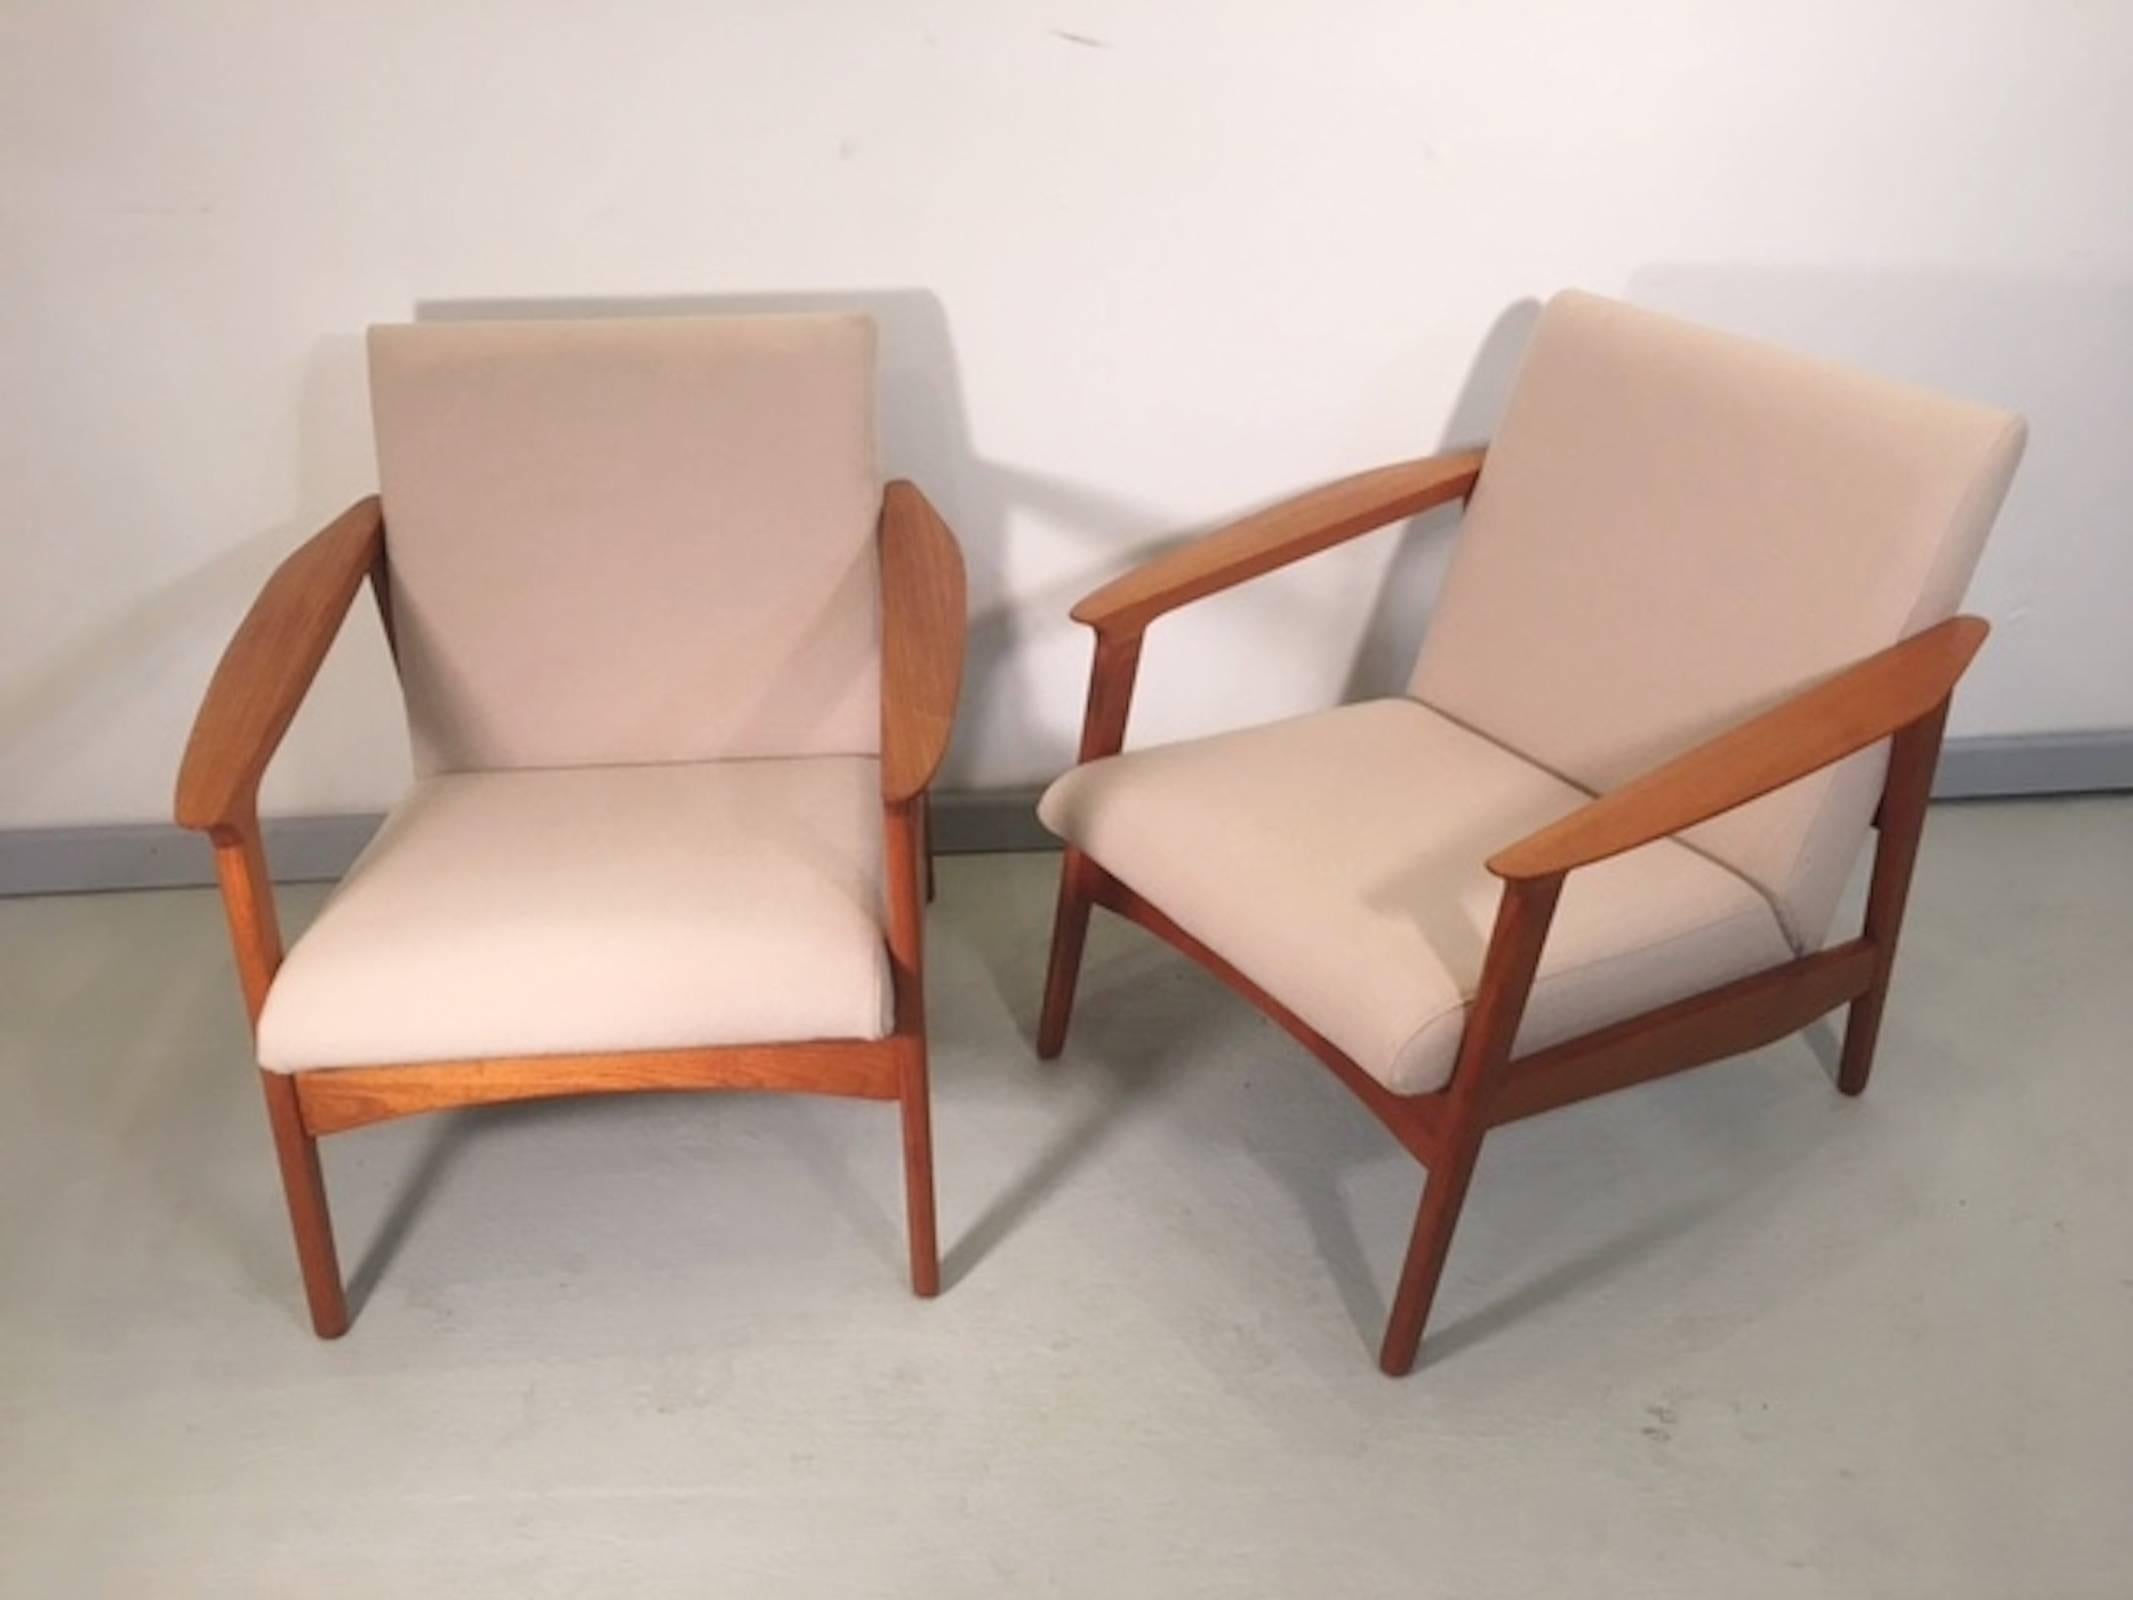 Vintage modern lounge chairs with sculpted teak frame and thick cushioning. Stamped with Danish makers mark.

(Please confirm item location with dealer).
 